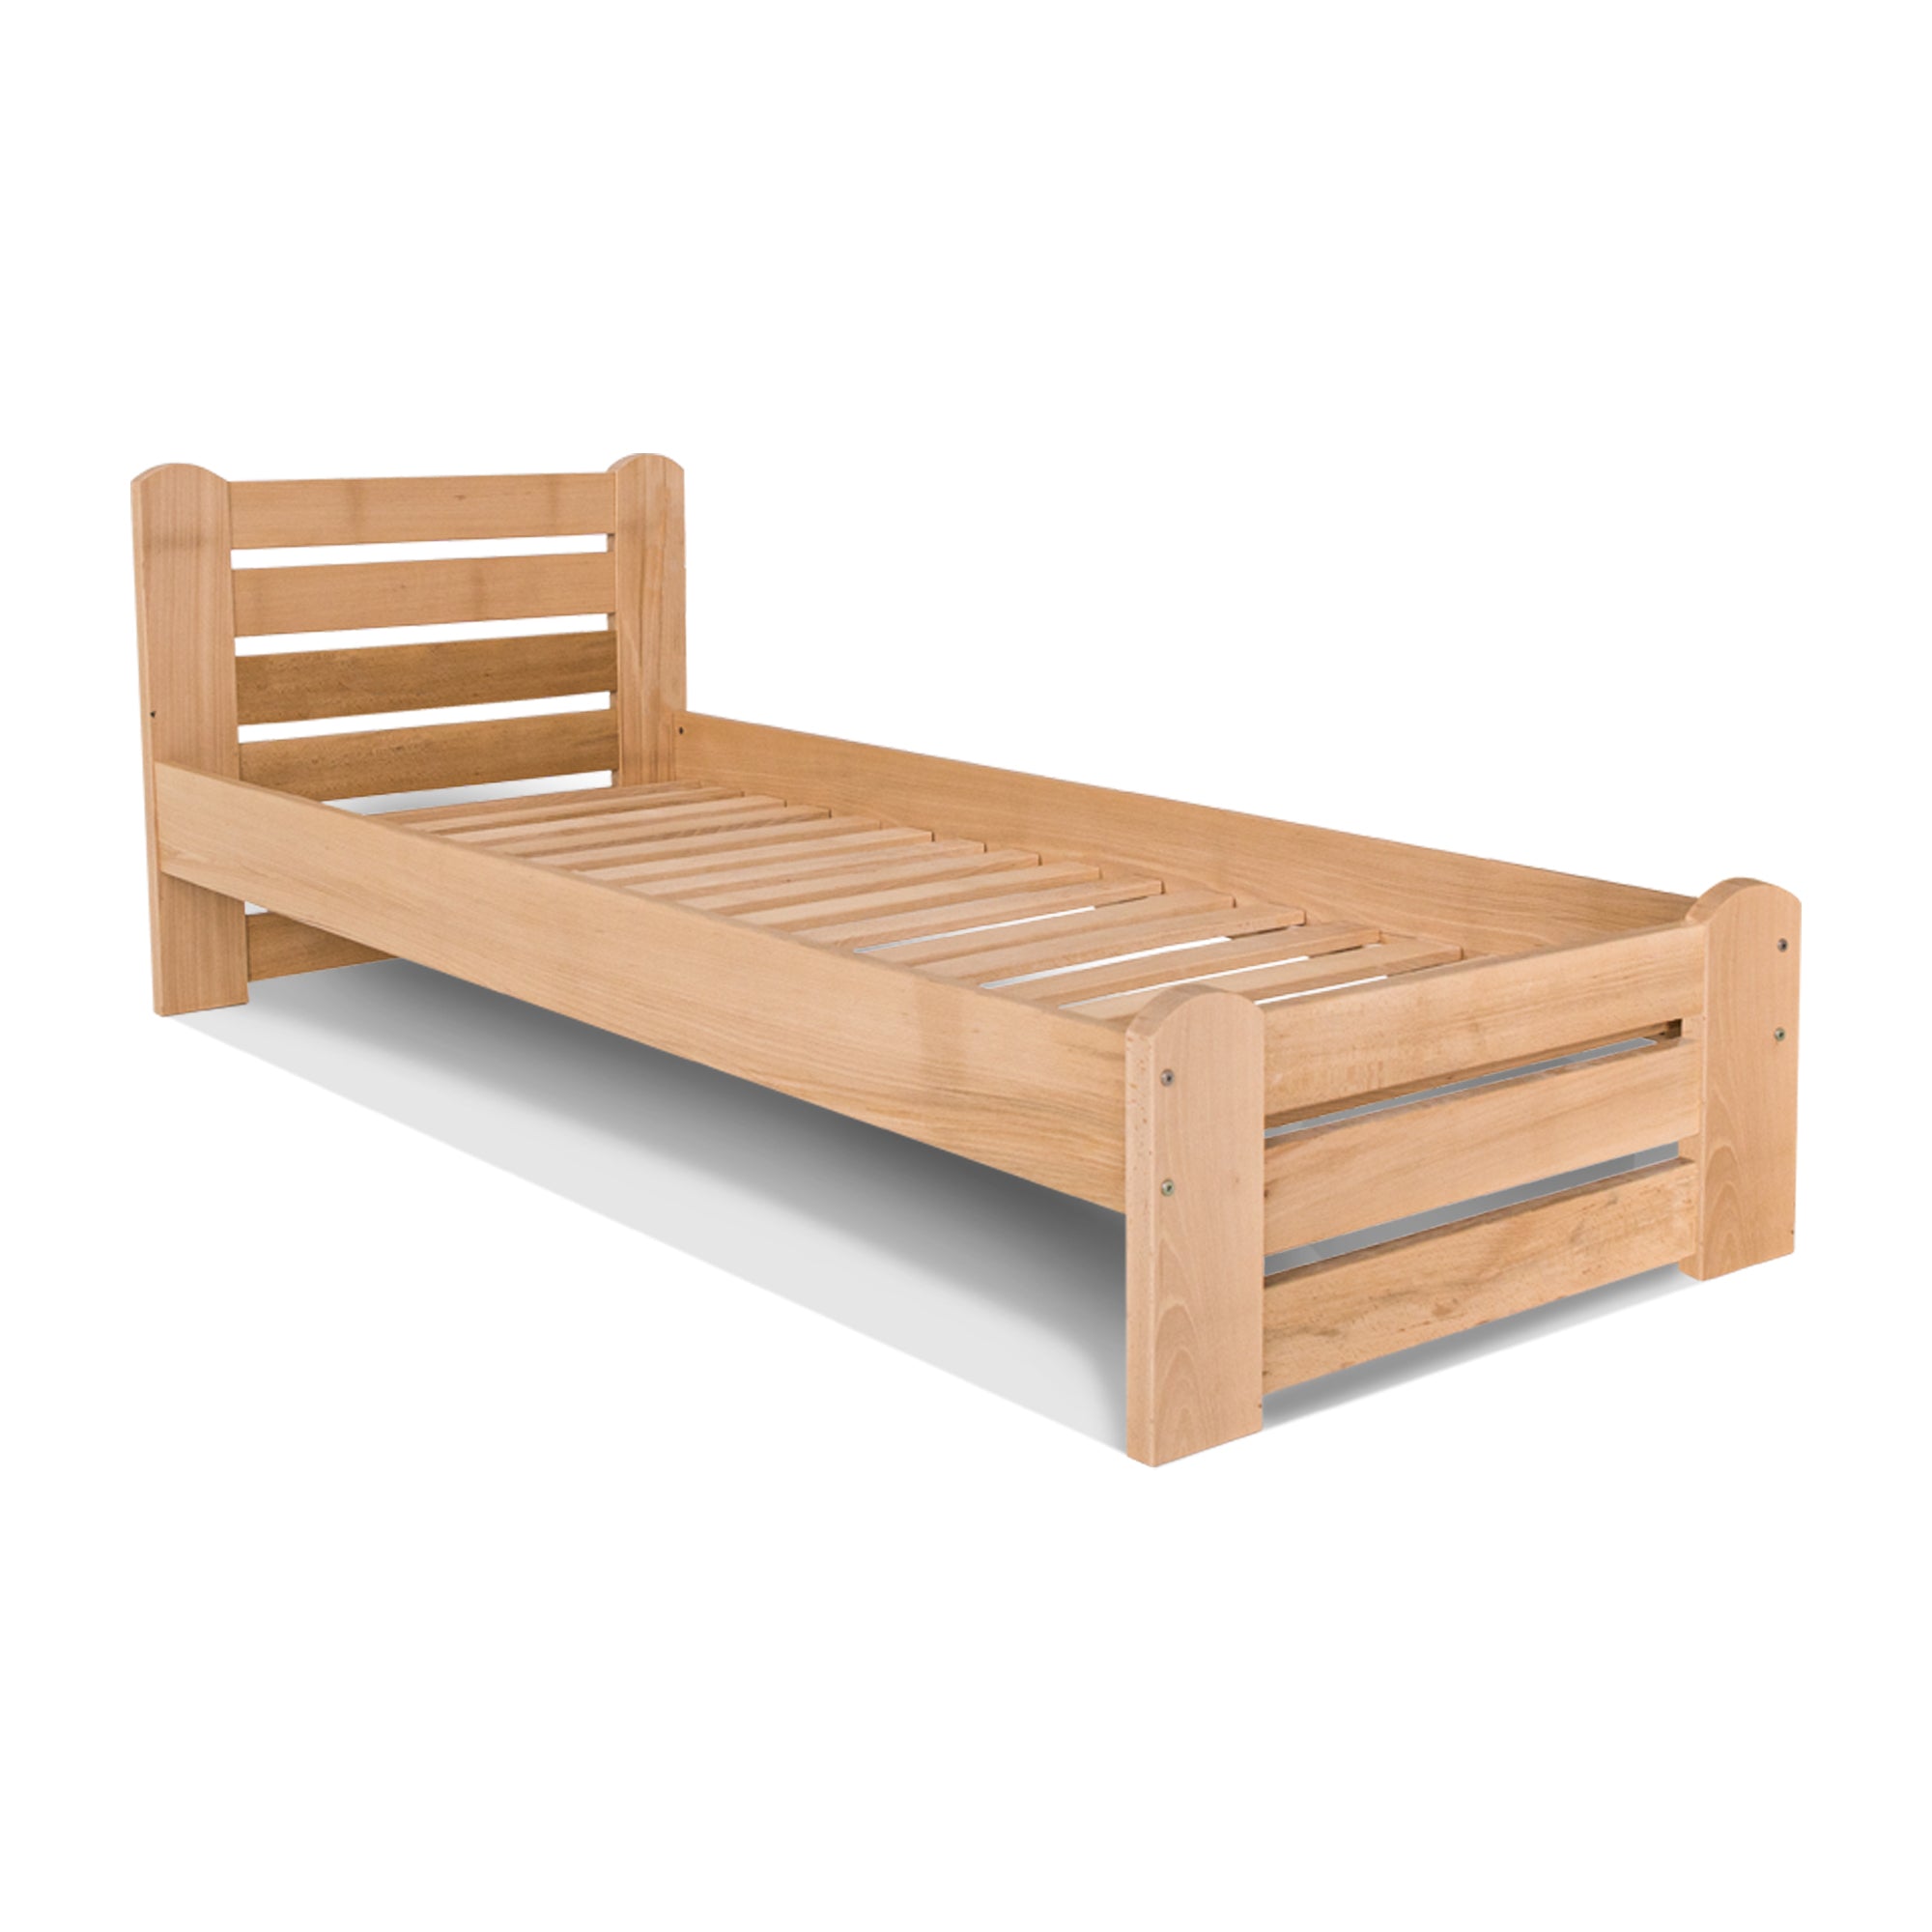 COUNTRY Single Bed, Beech Wood-natural frame without mattress